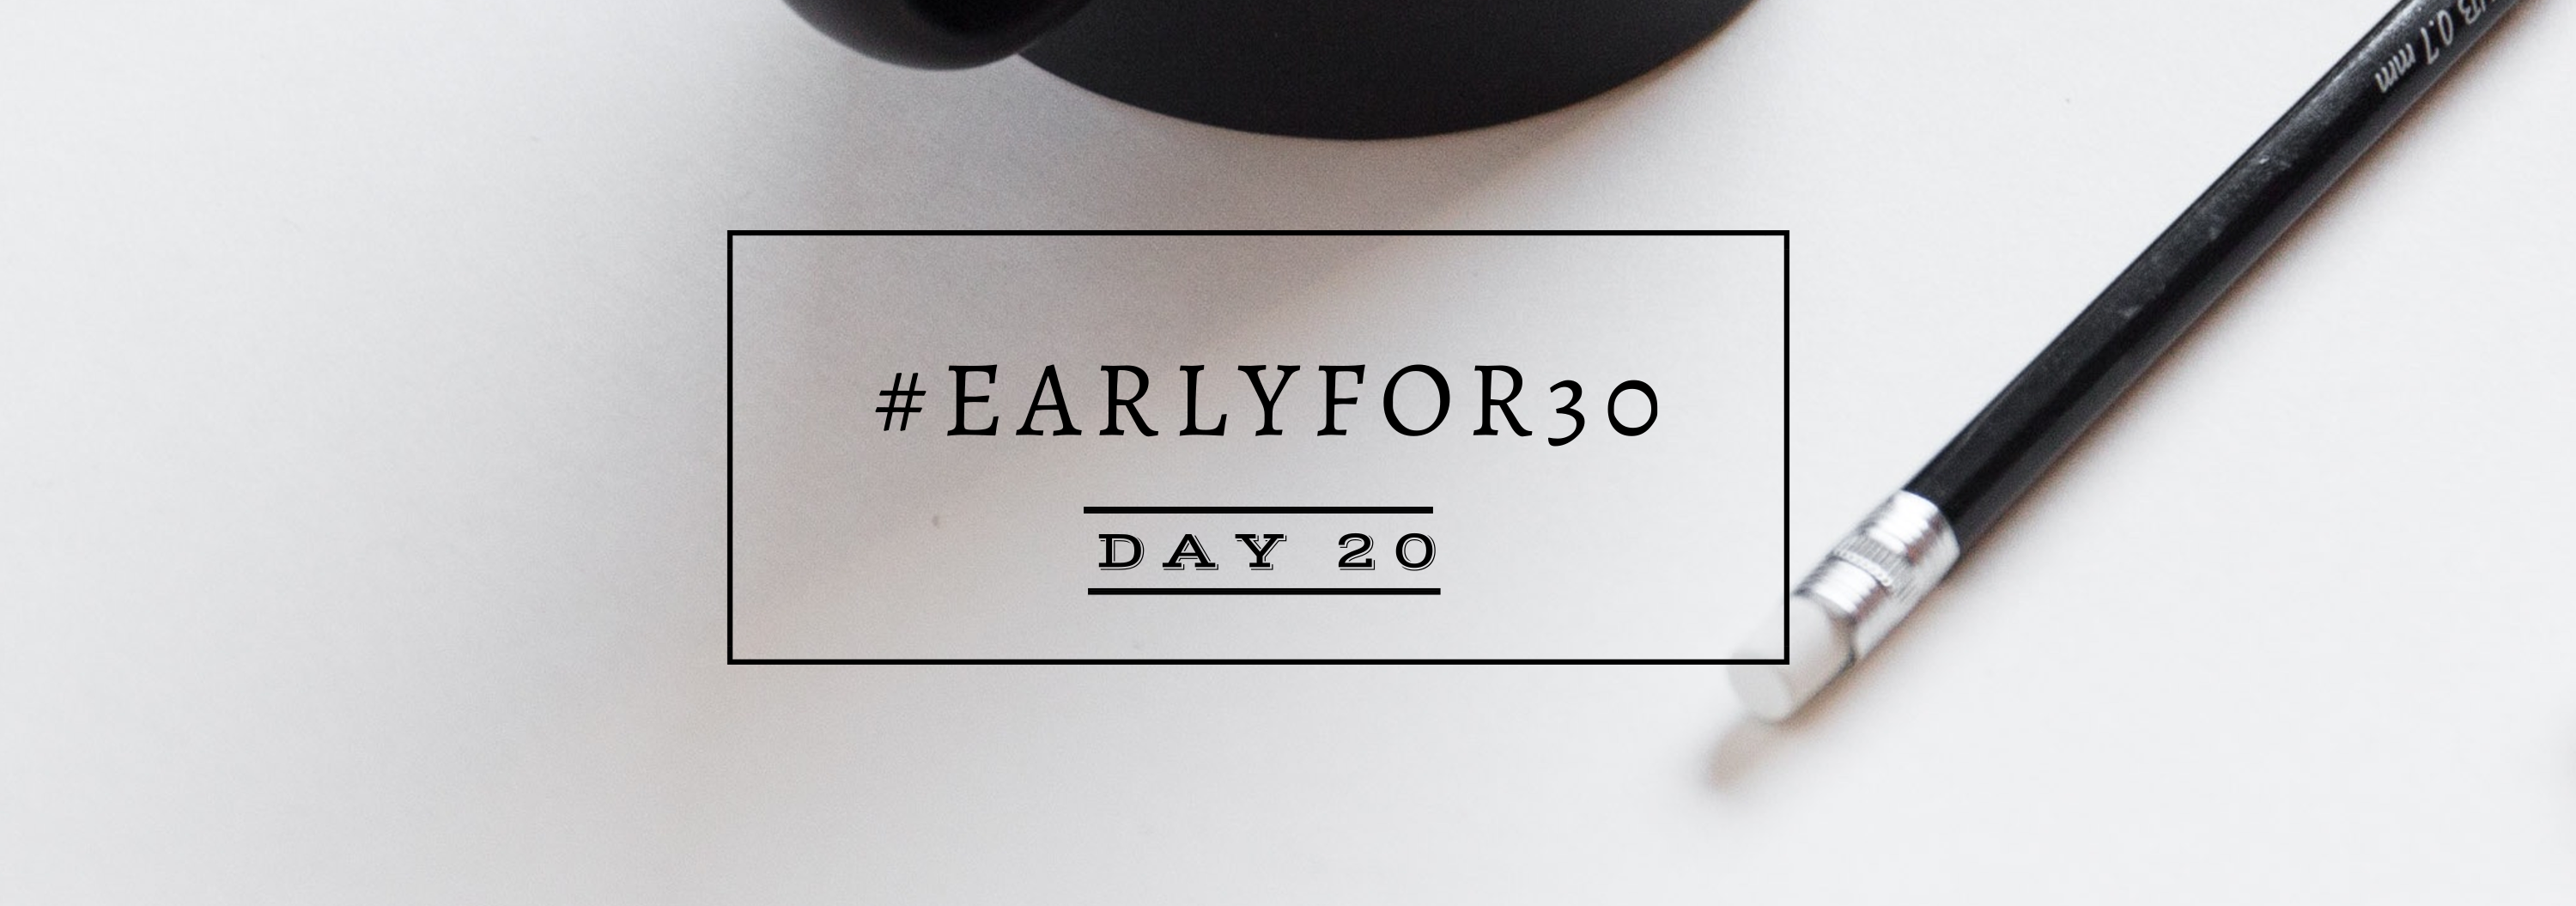 #Earlyfor30 – Day 20